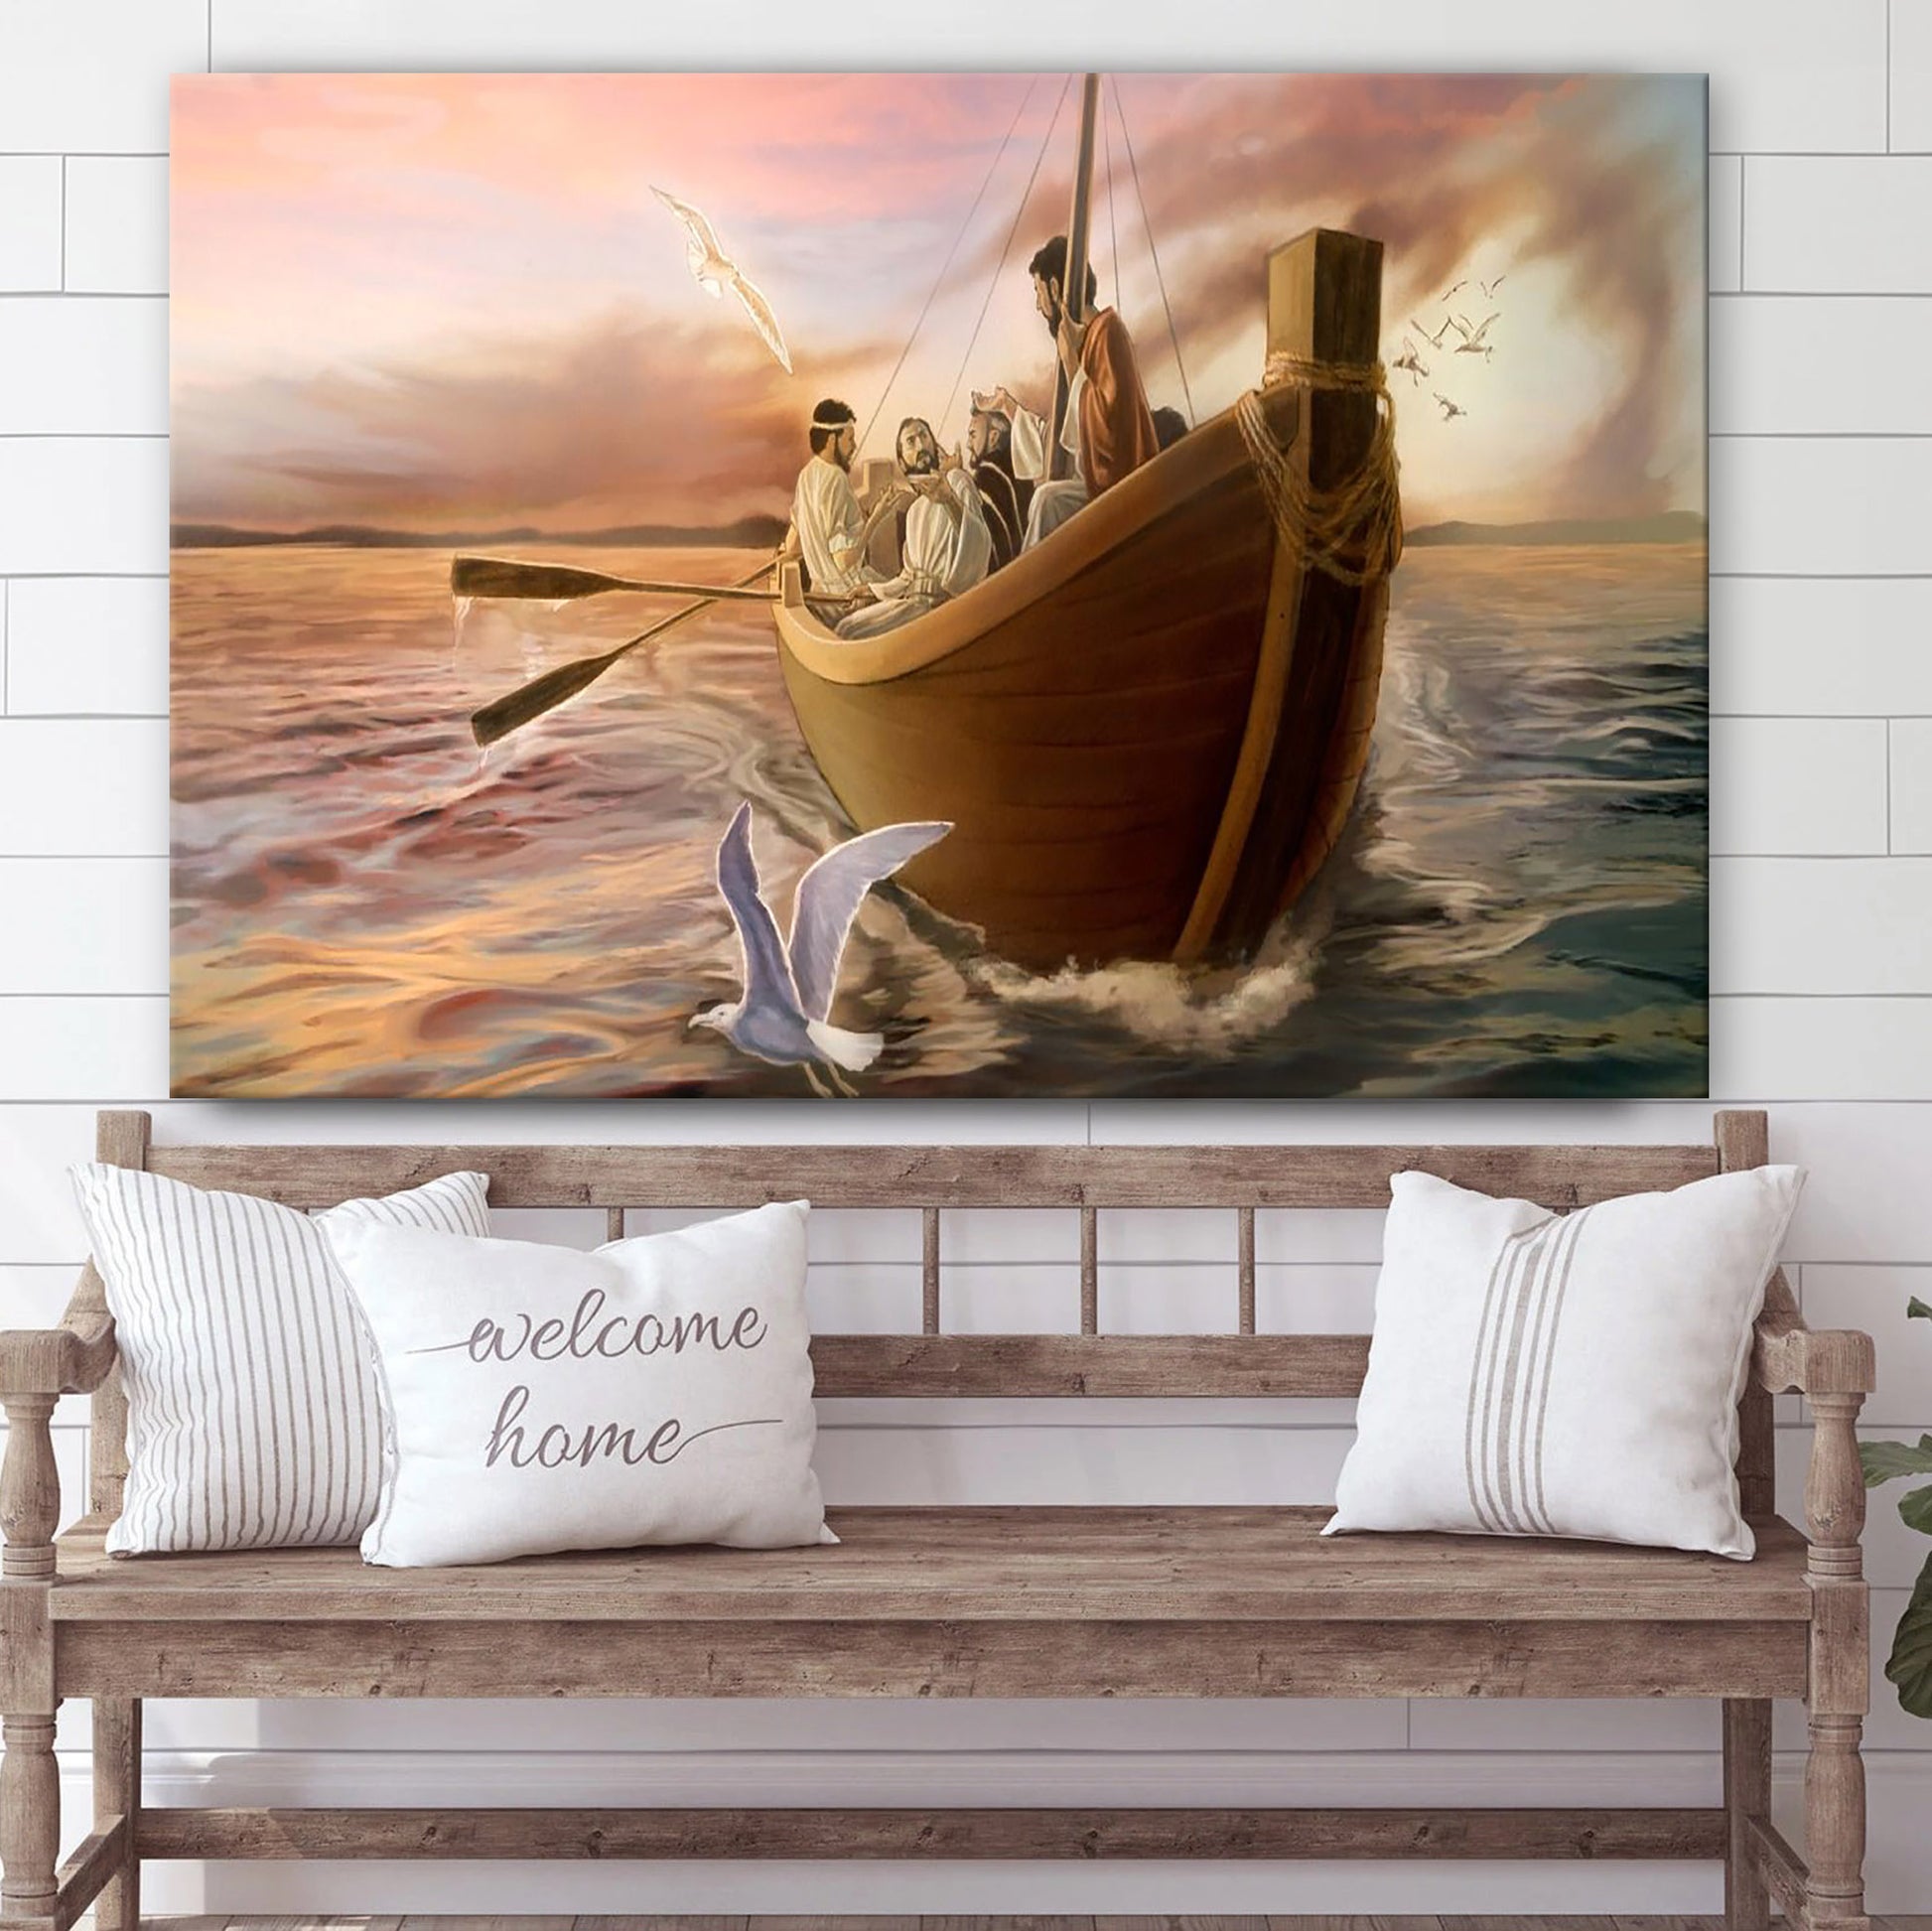 Jesus In Boat With Disciples - Jesus Canvas Wall Art - Christian Wall Art